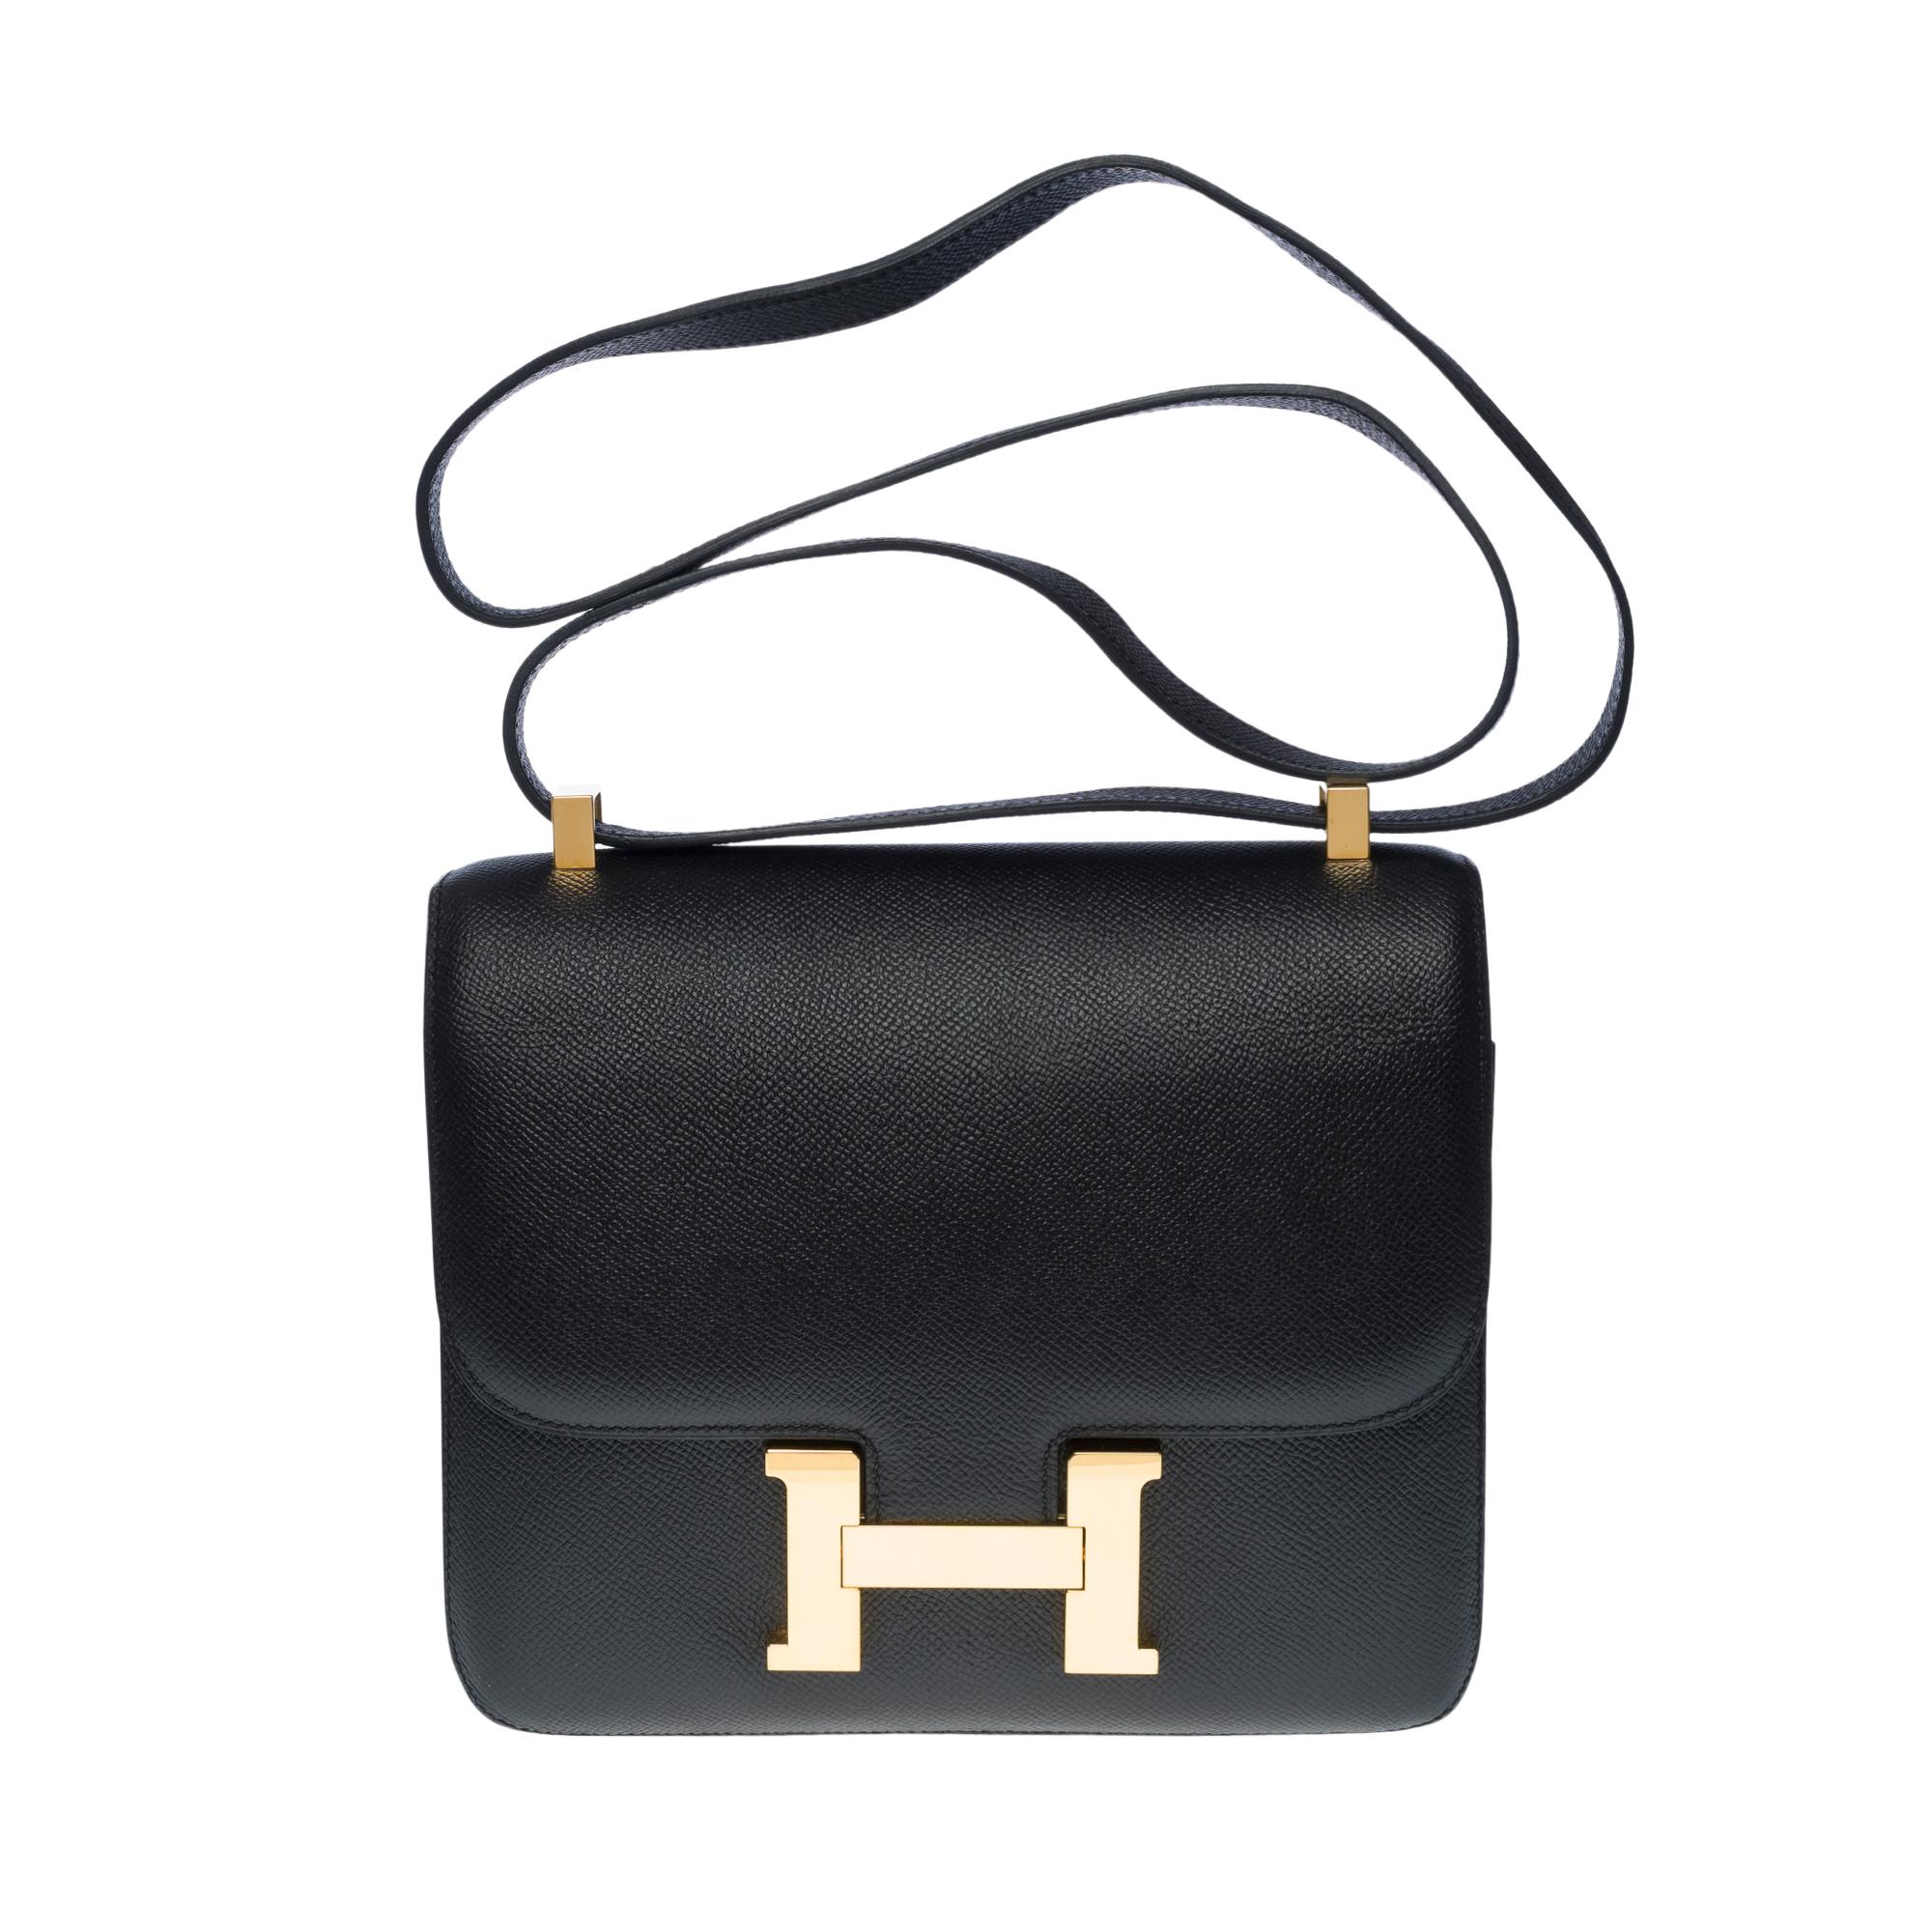 Gorgeous Hermes Constance 23 shoulder bag in black epsom leather, gold plated metal hardware, convertible handle in black epsom leather for a hand, shoulder or crossbody carry

Closure in gilded metal on flap
Black leather lining, 2 compartments,